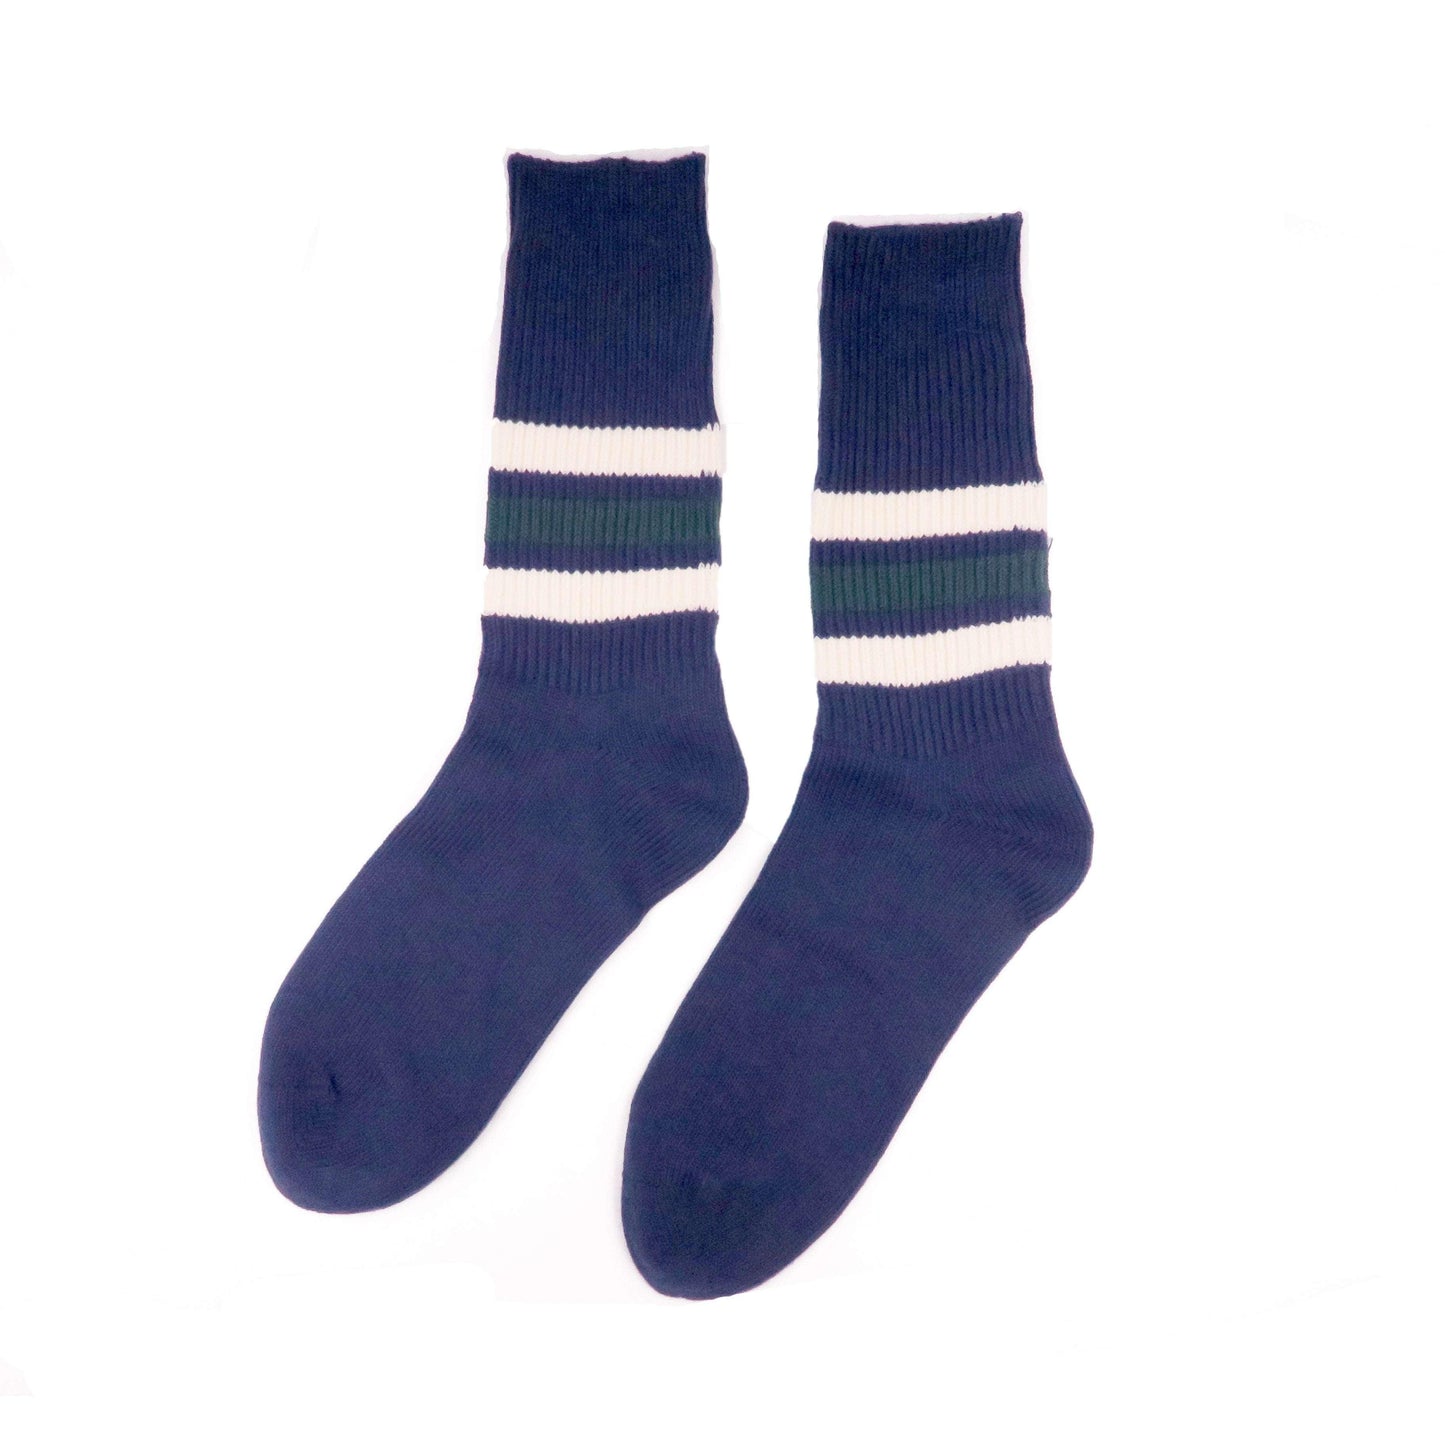 old school green and white striped navy socks